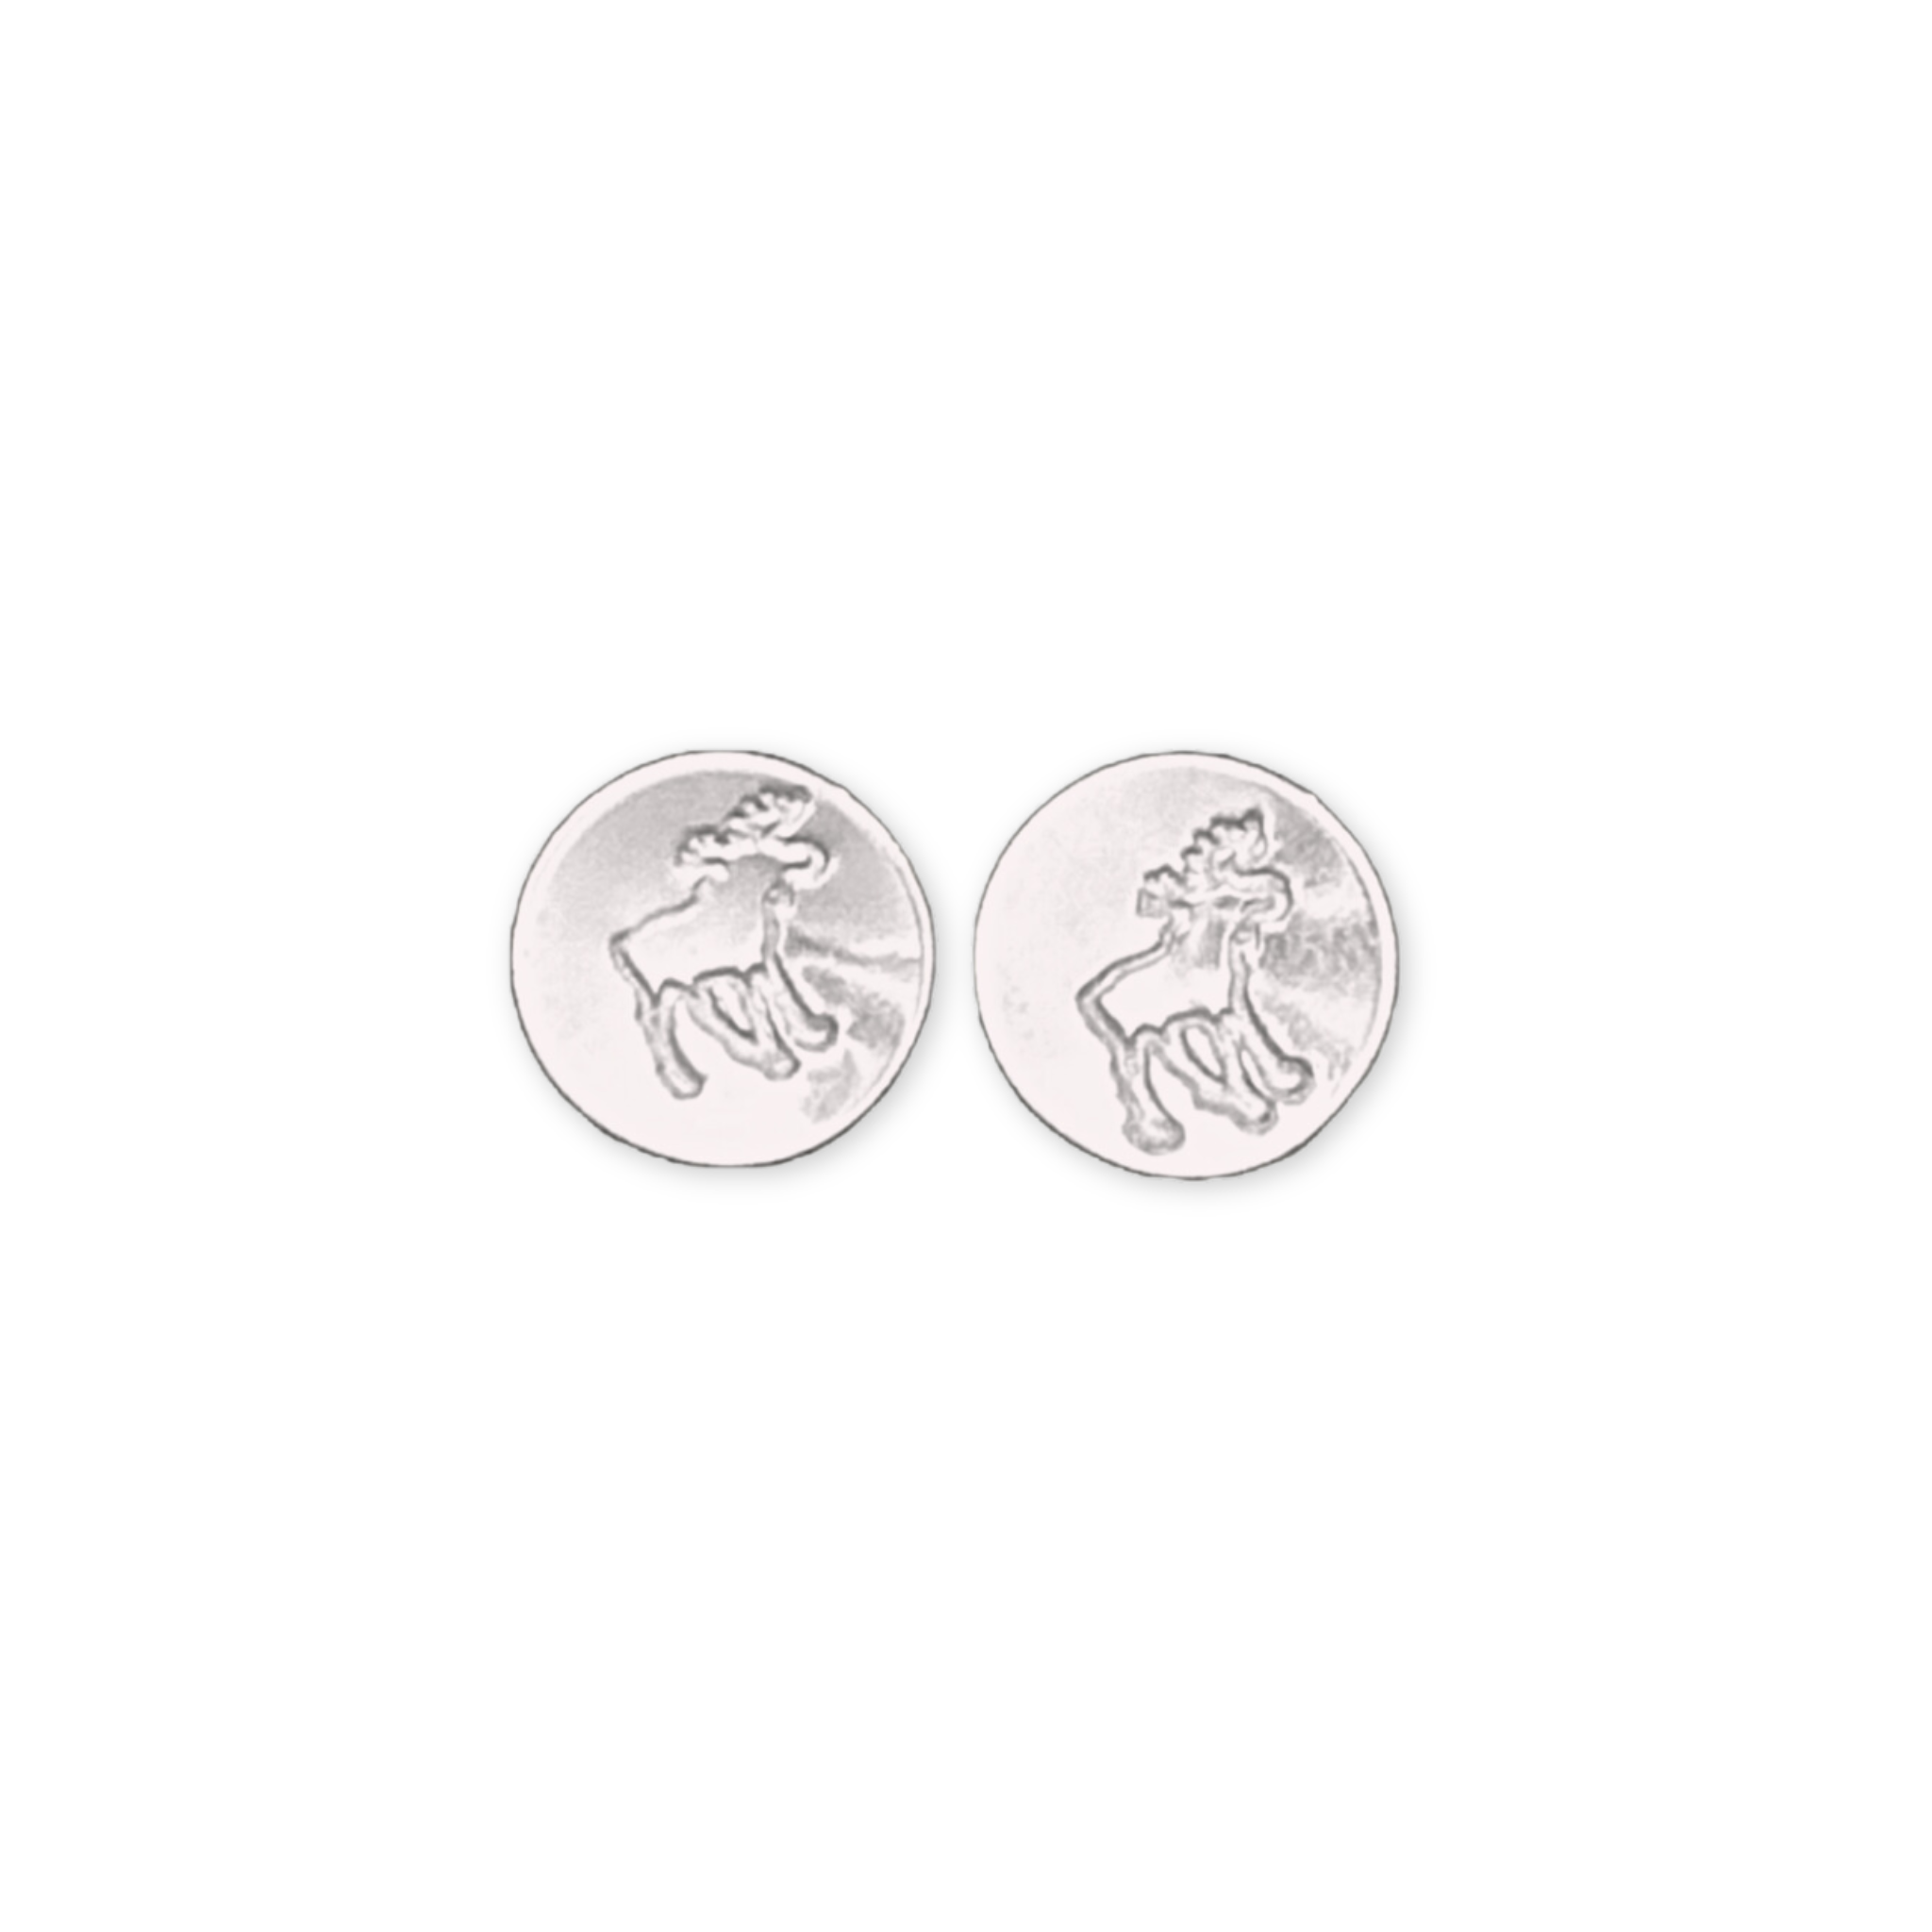 stud earrings with a stamped moose on a small round disc